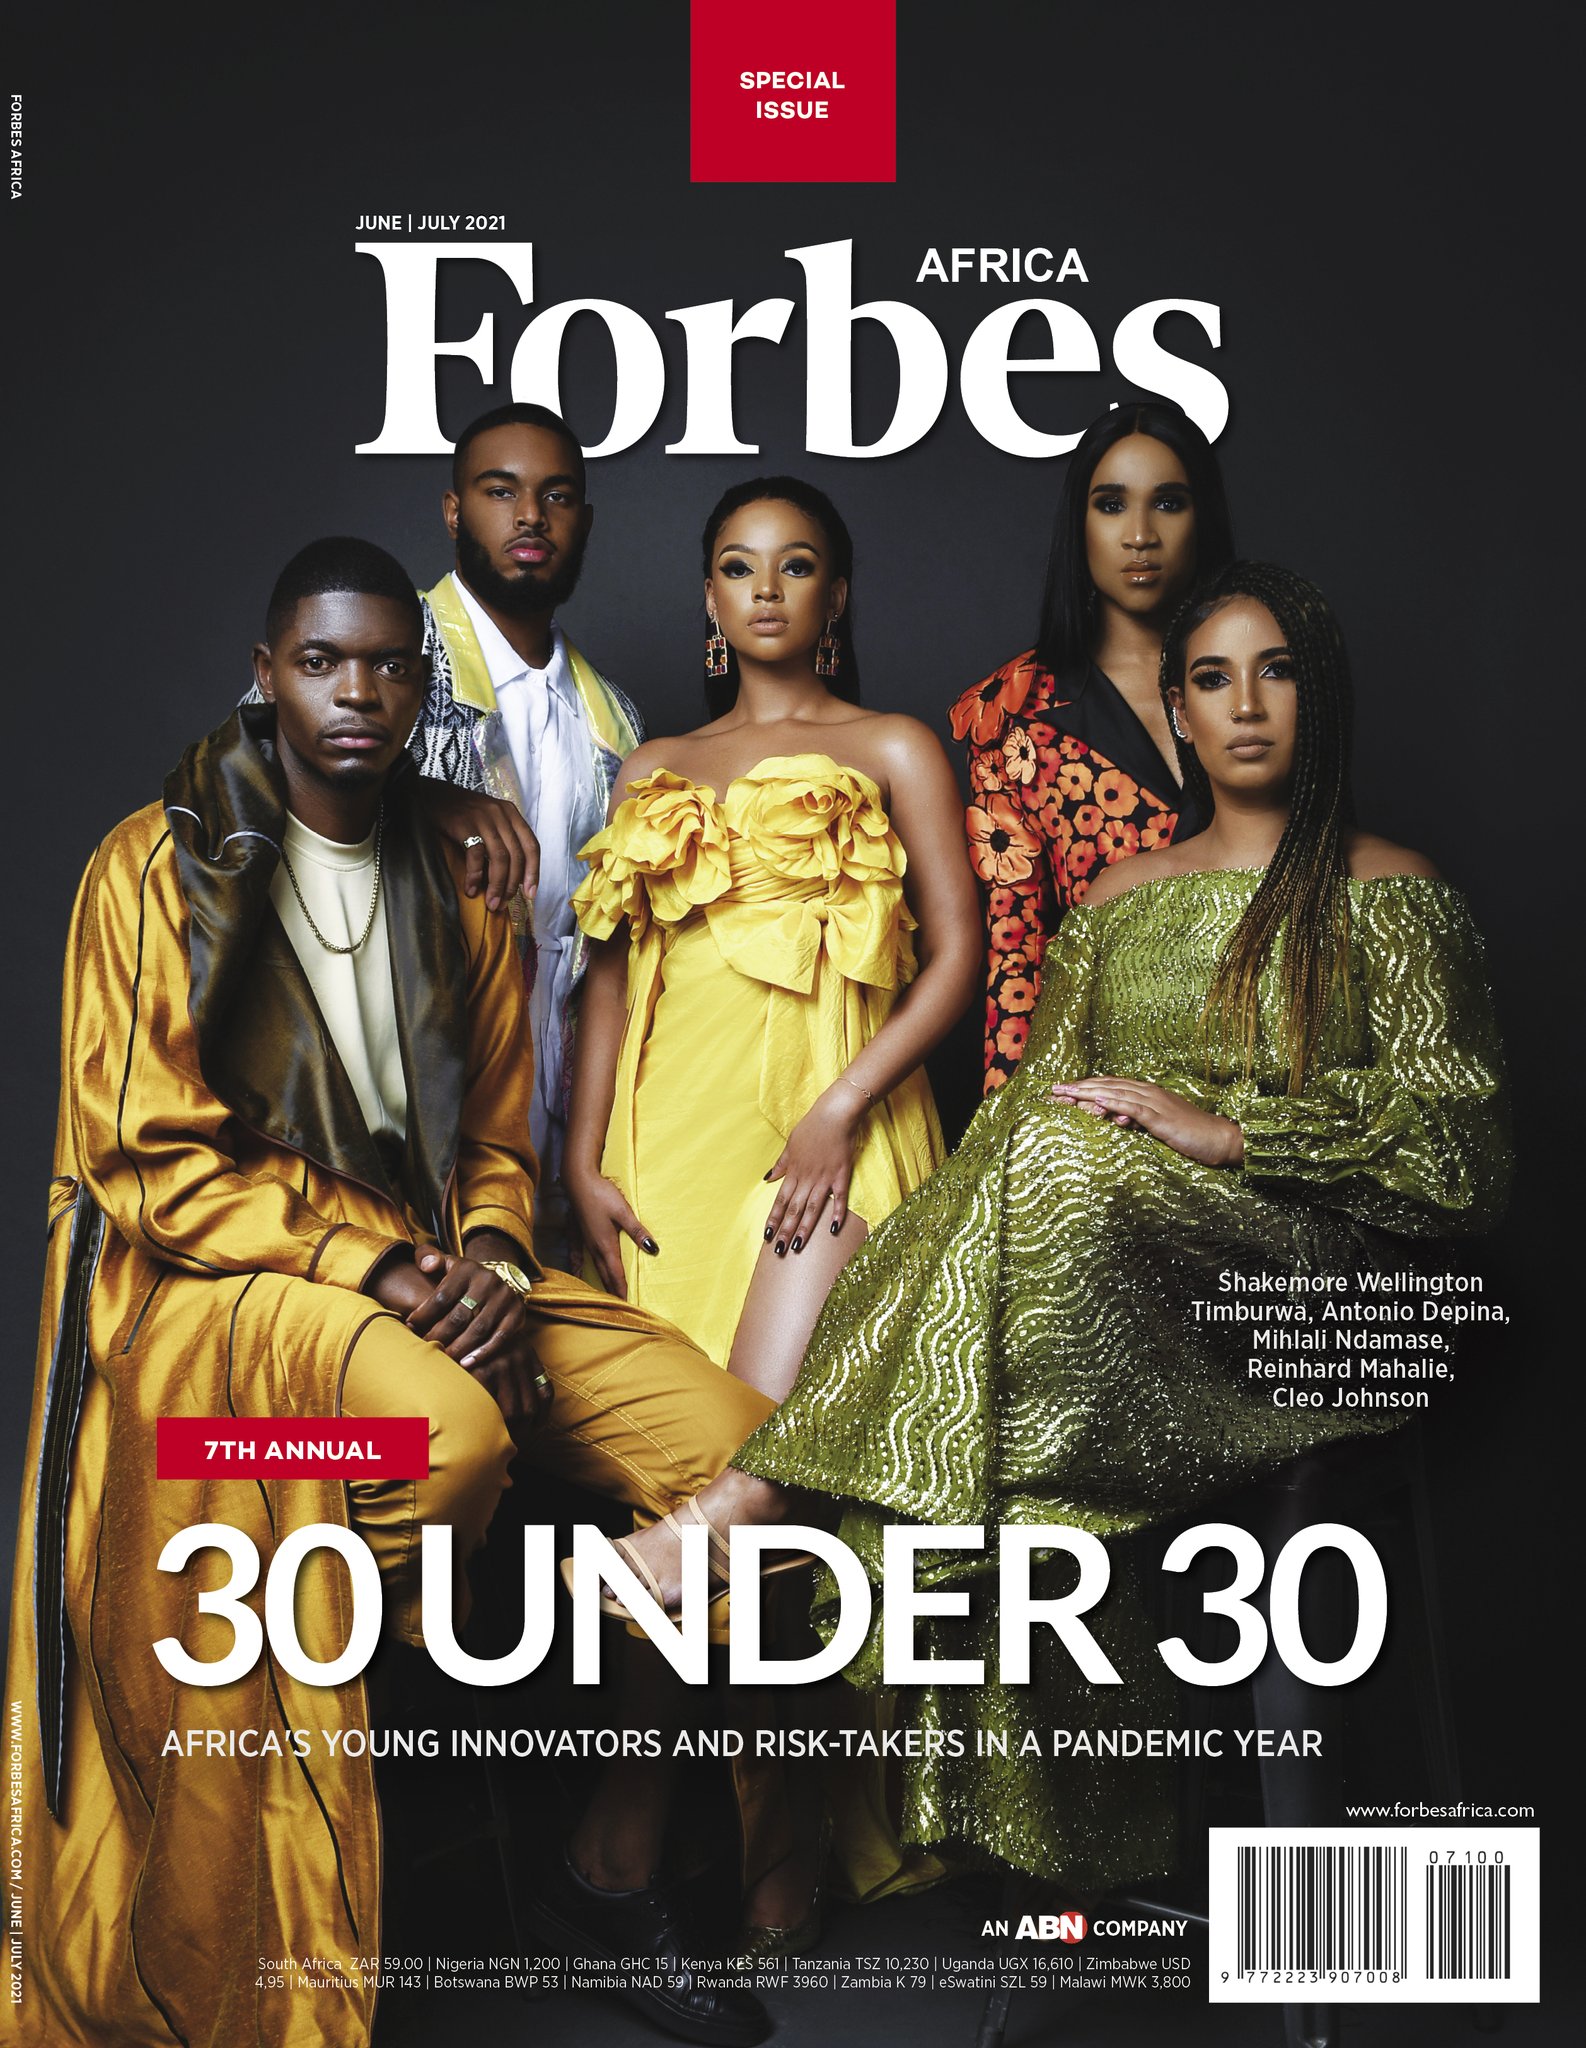 Category: Under 30 - Forbes Africa